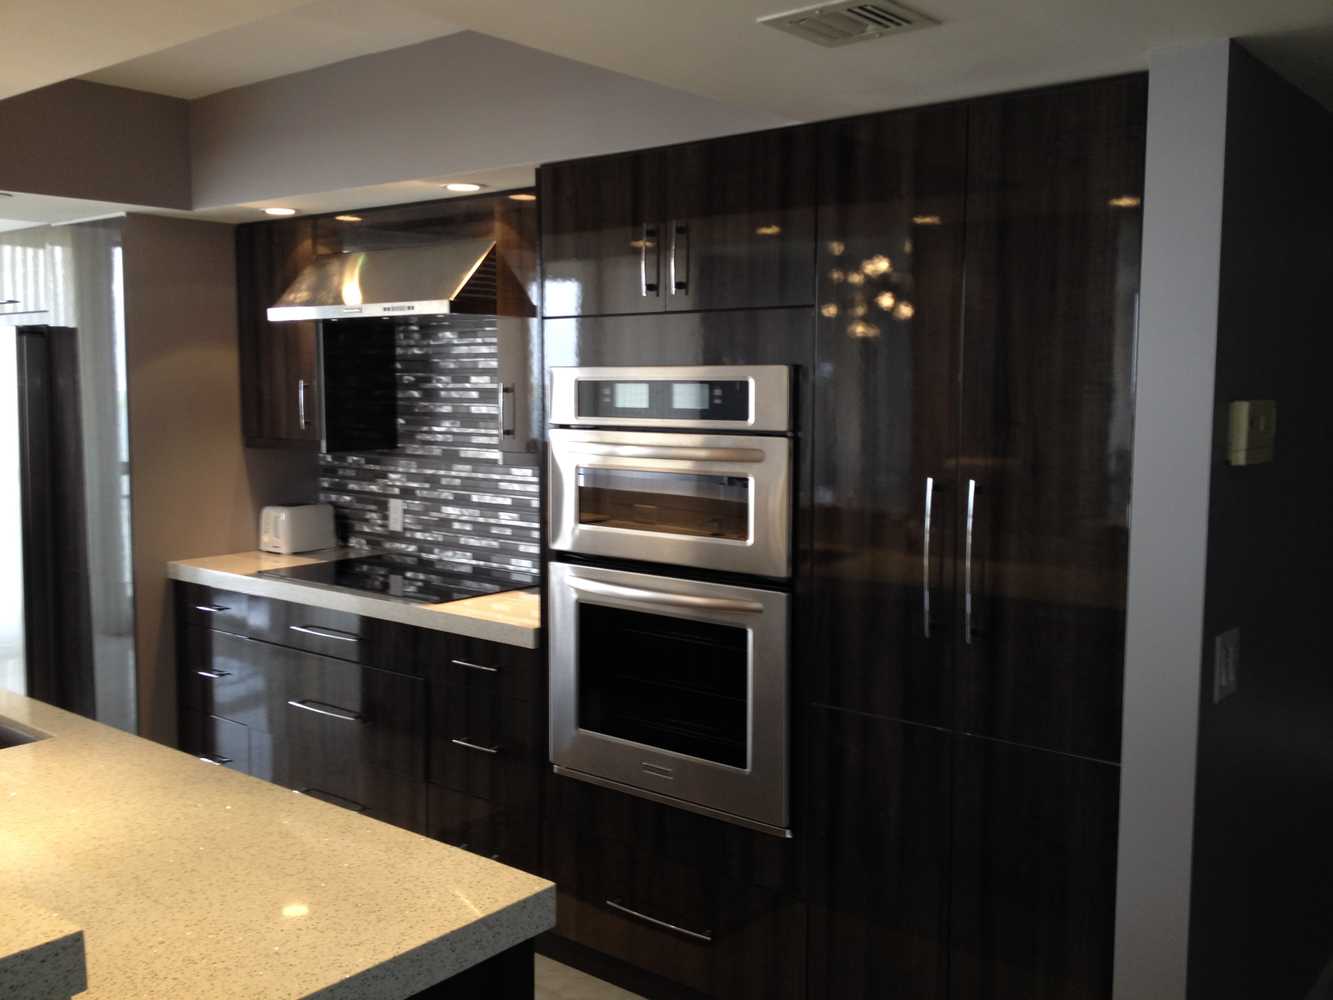 Photo(s) from Integra Kitchen and bath,Inc.